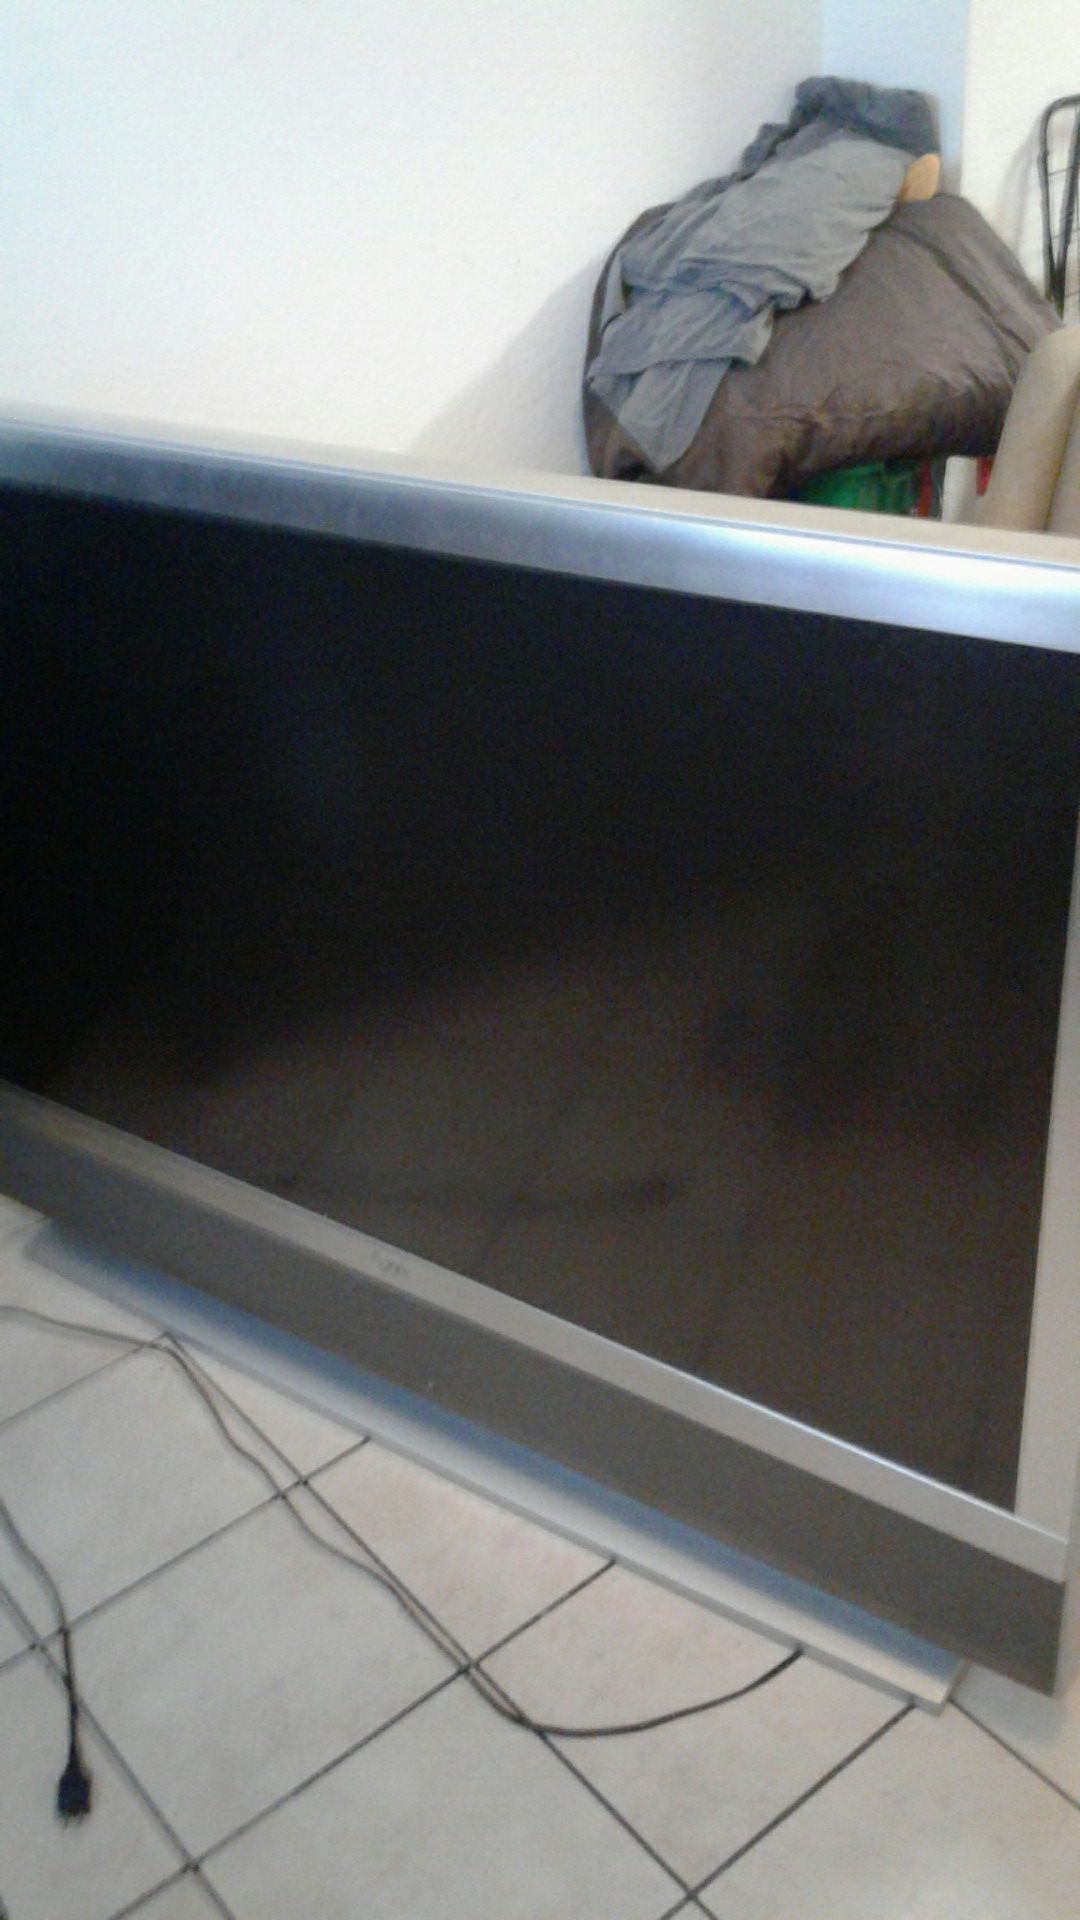 2003 LCD projection tv